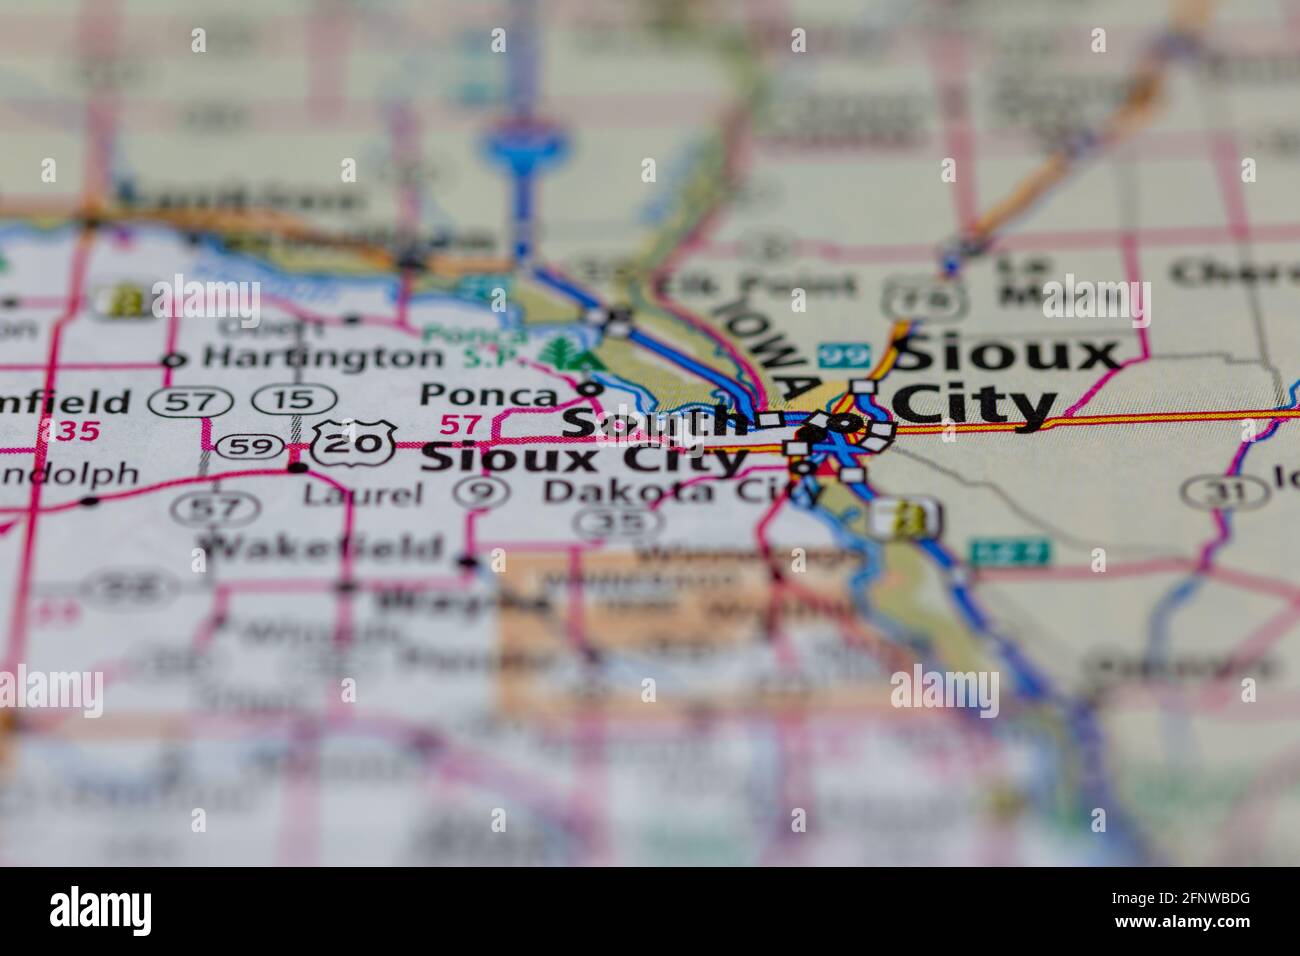 South Sioux City Nebraska USA Shown on a Geography map or Road map Stock Photo